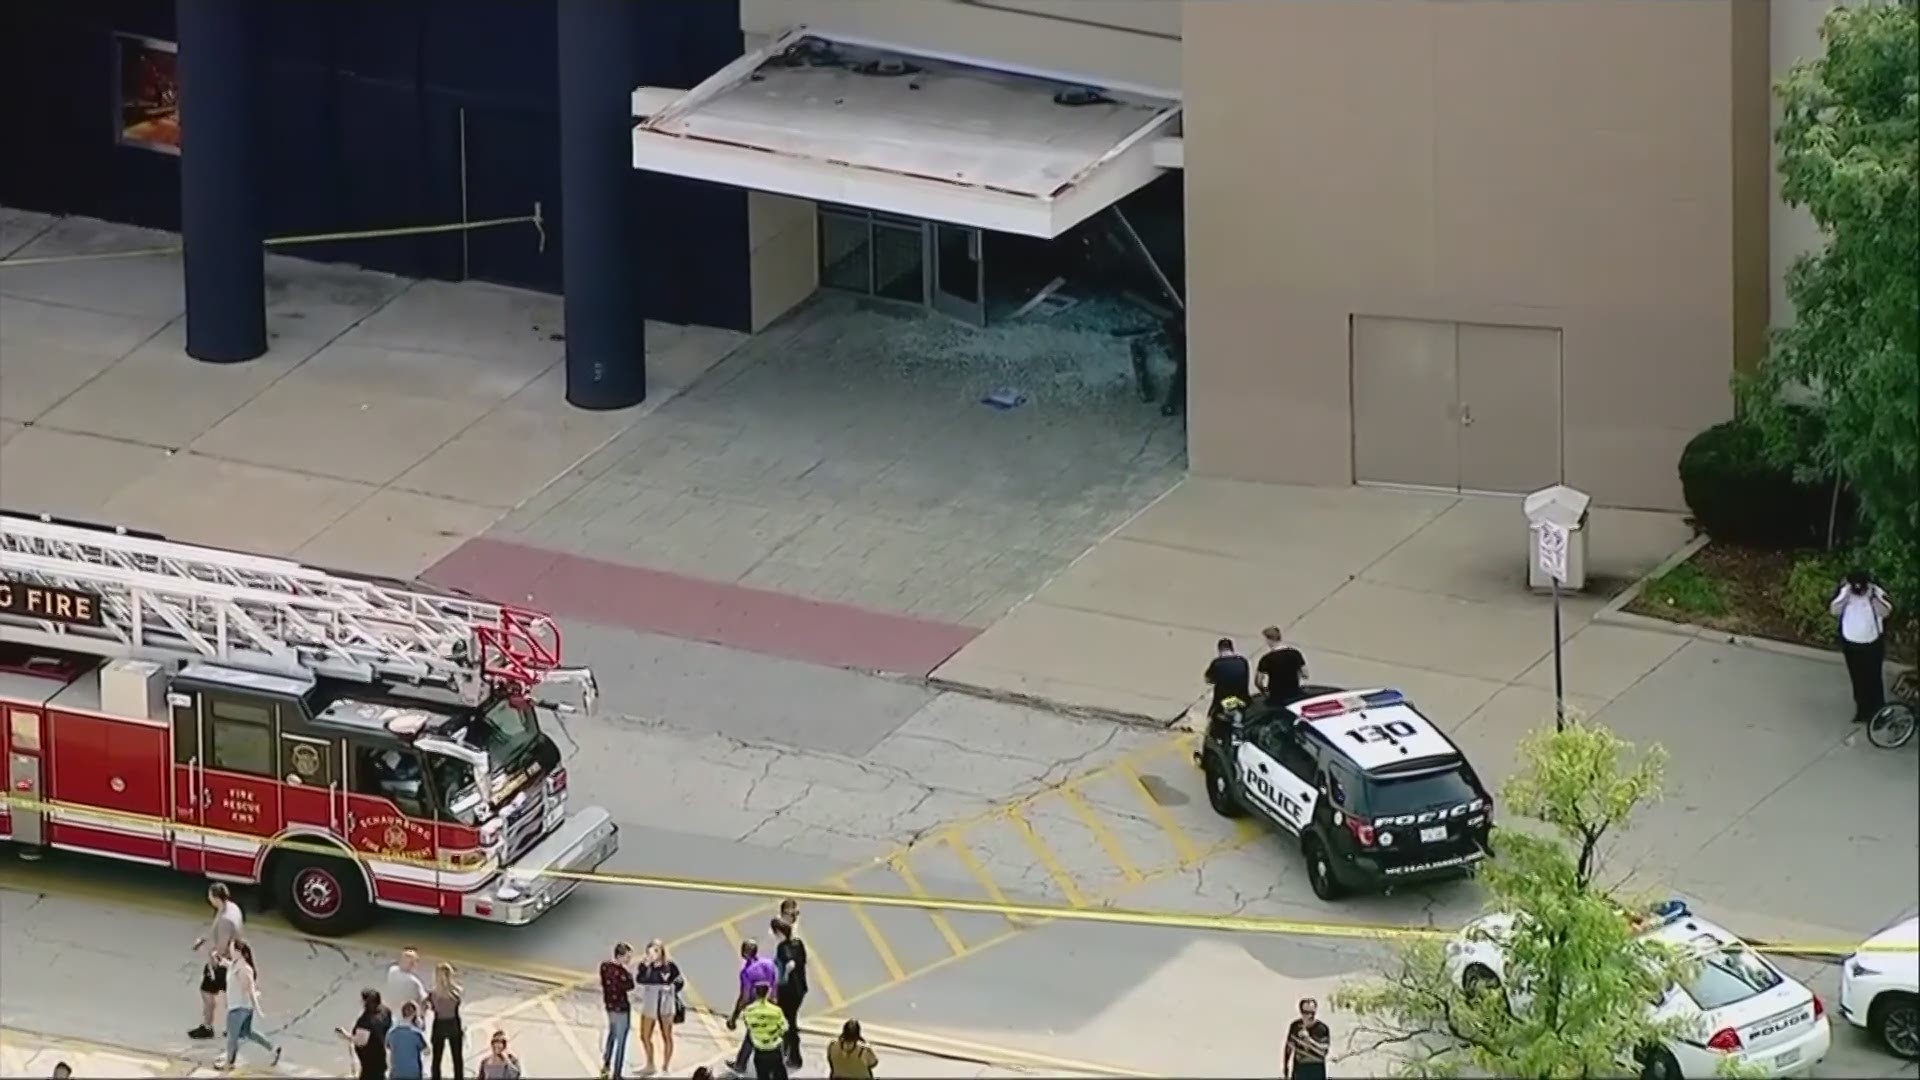 Police have arrested a man who drove through the corridors of a suburban Chicago mall before crashing into a clothing store.